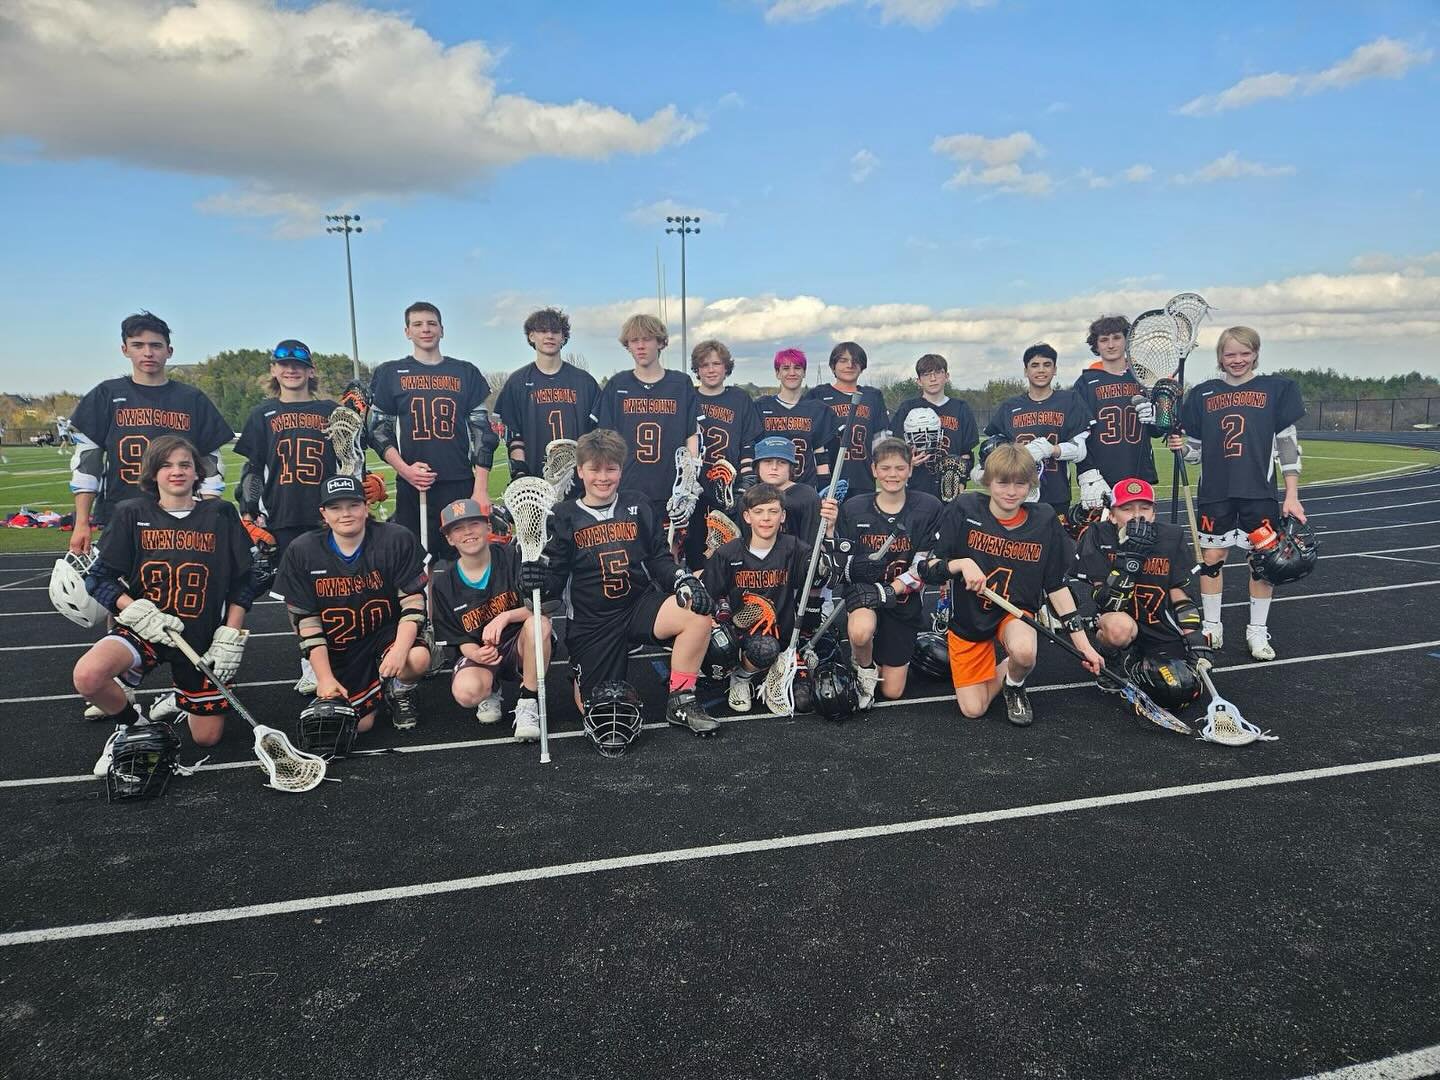 OSML U15 spring field team also had a great start to the season bringing home two wins 🥍⭐️🧡